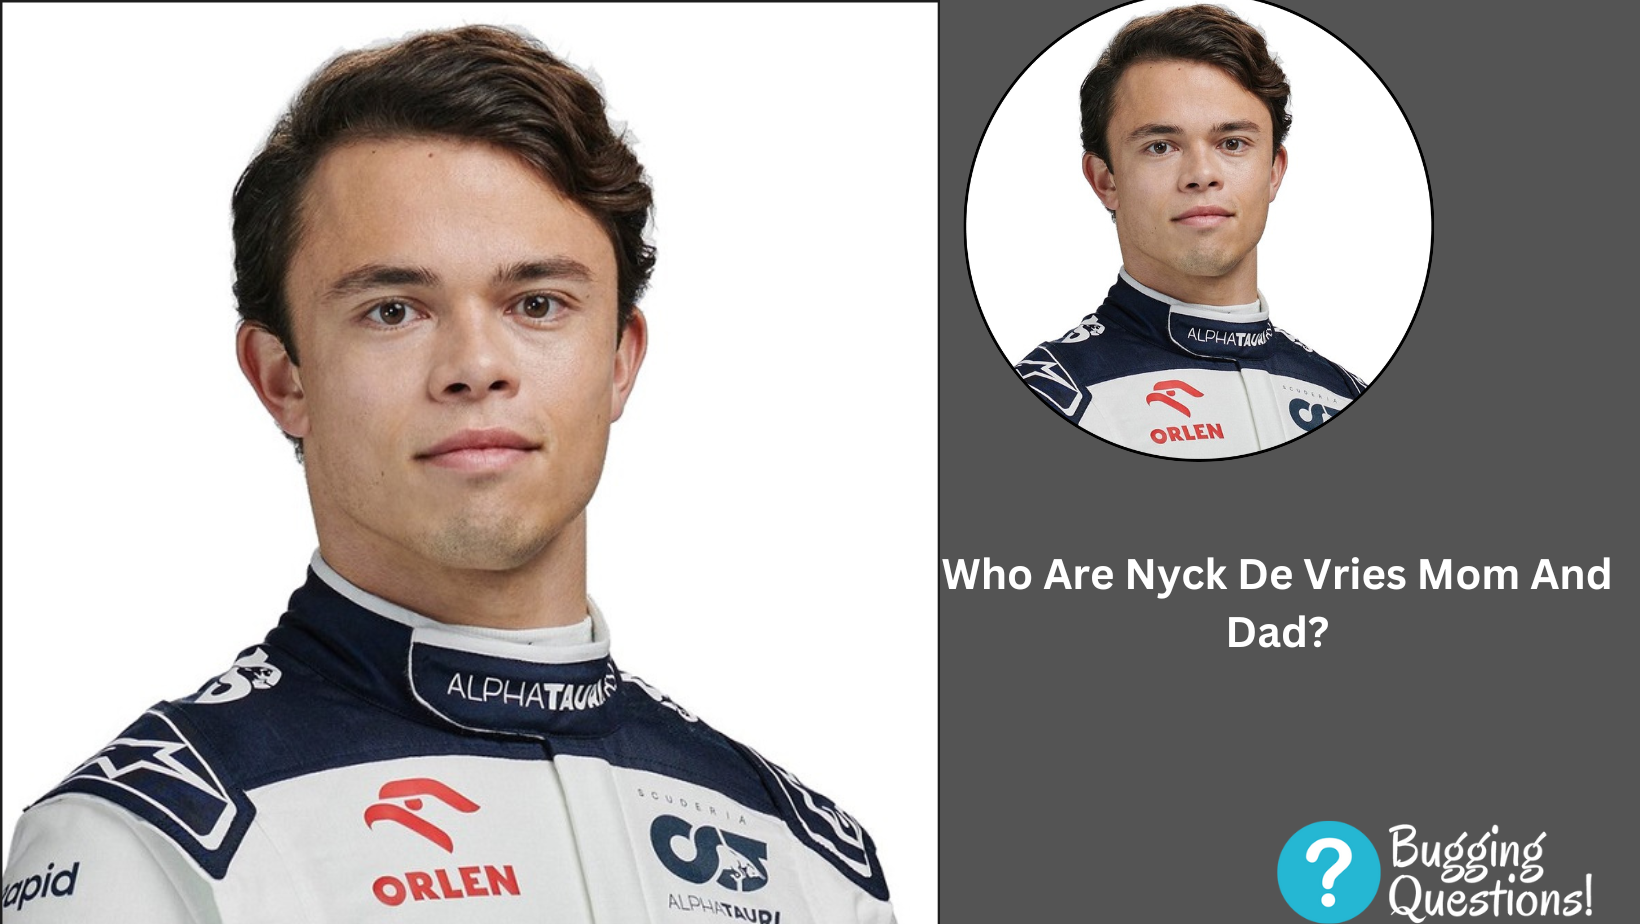 Who Are Nyck De Vries Mom And Dad?